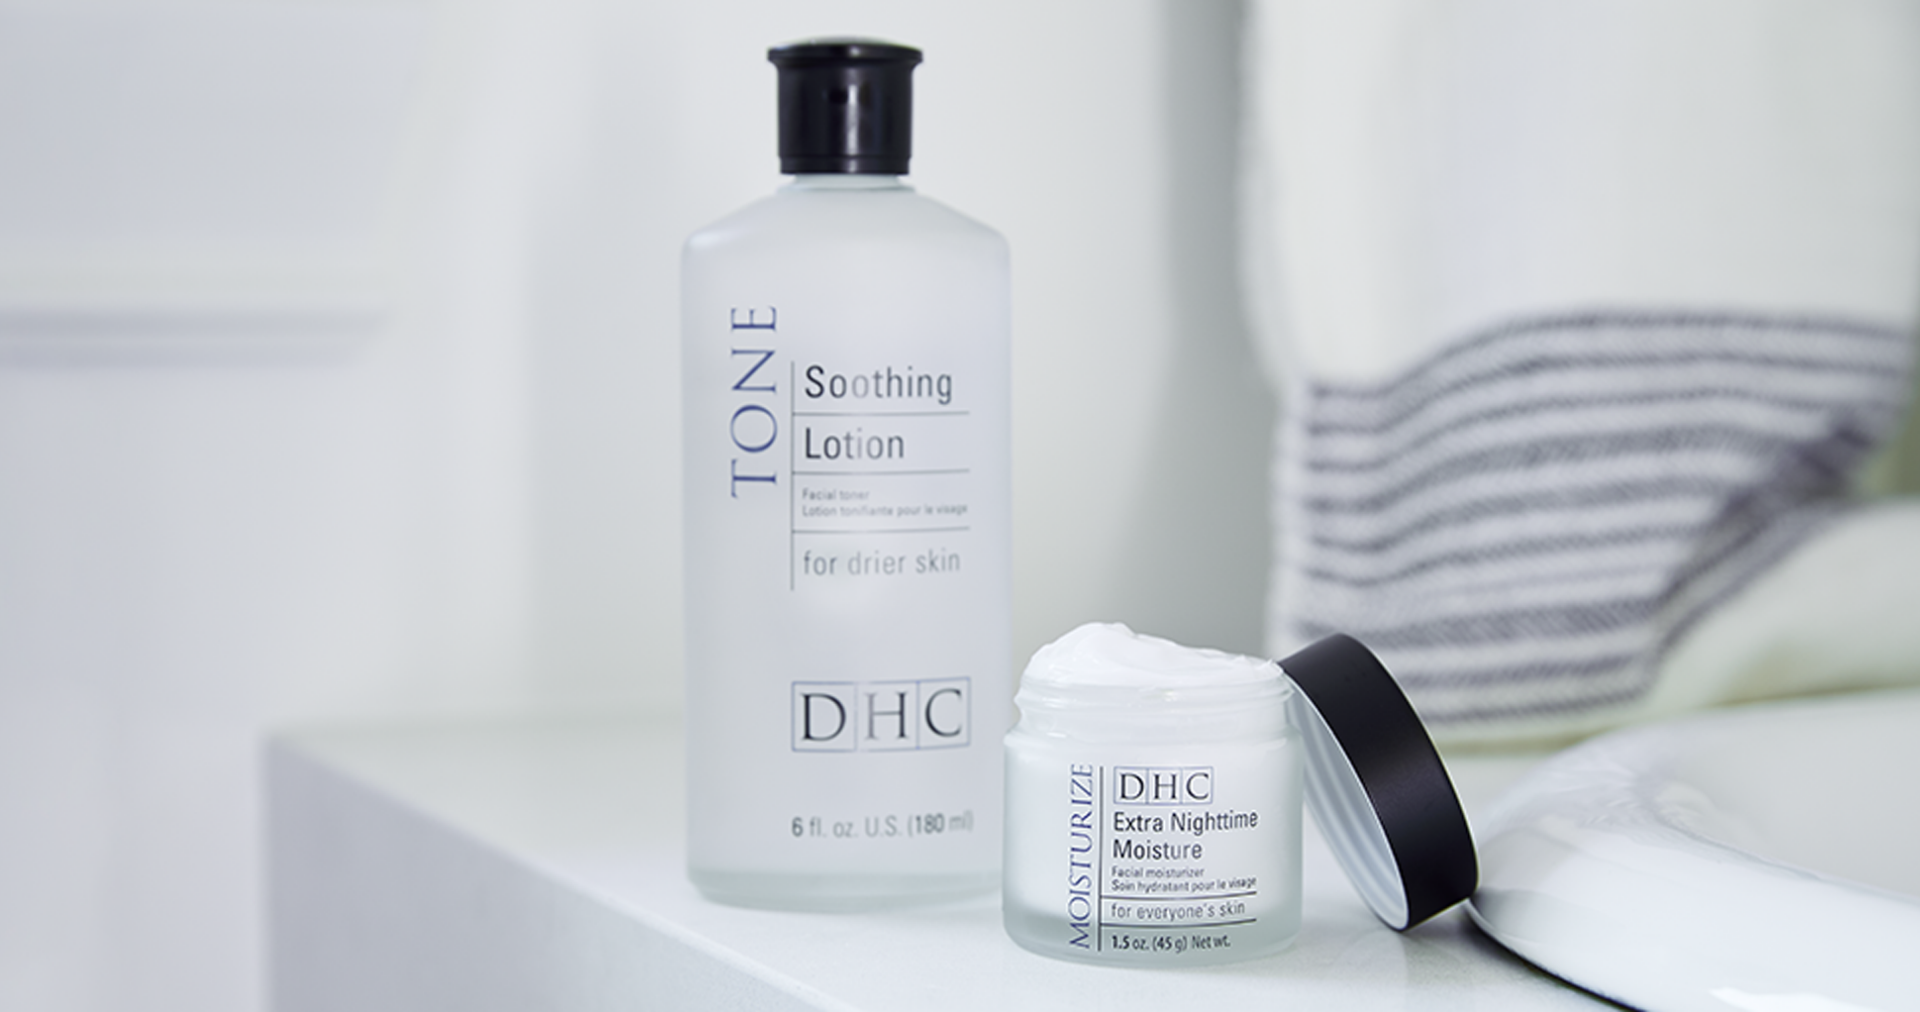 Double Moisture Skincare Set from DHC